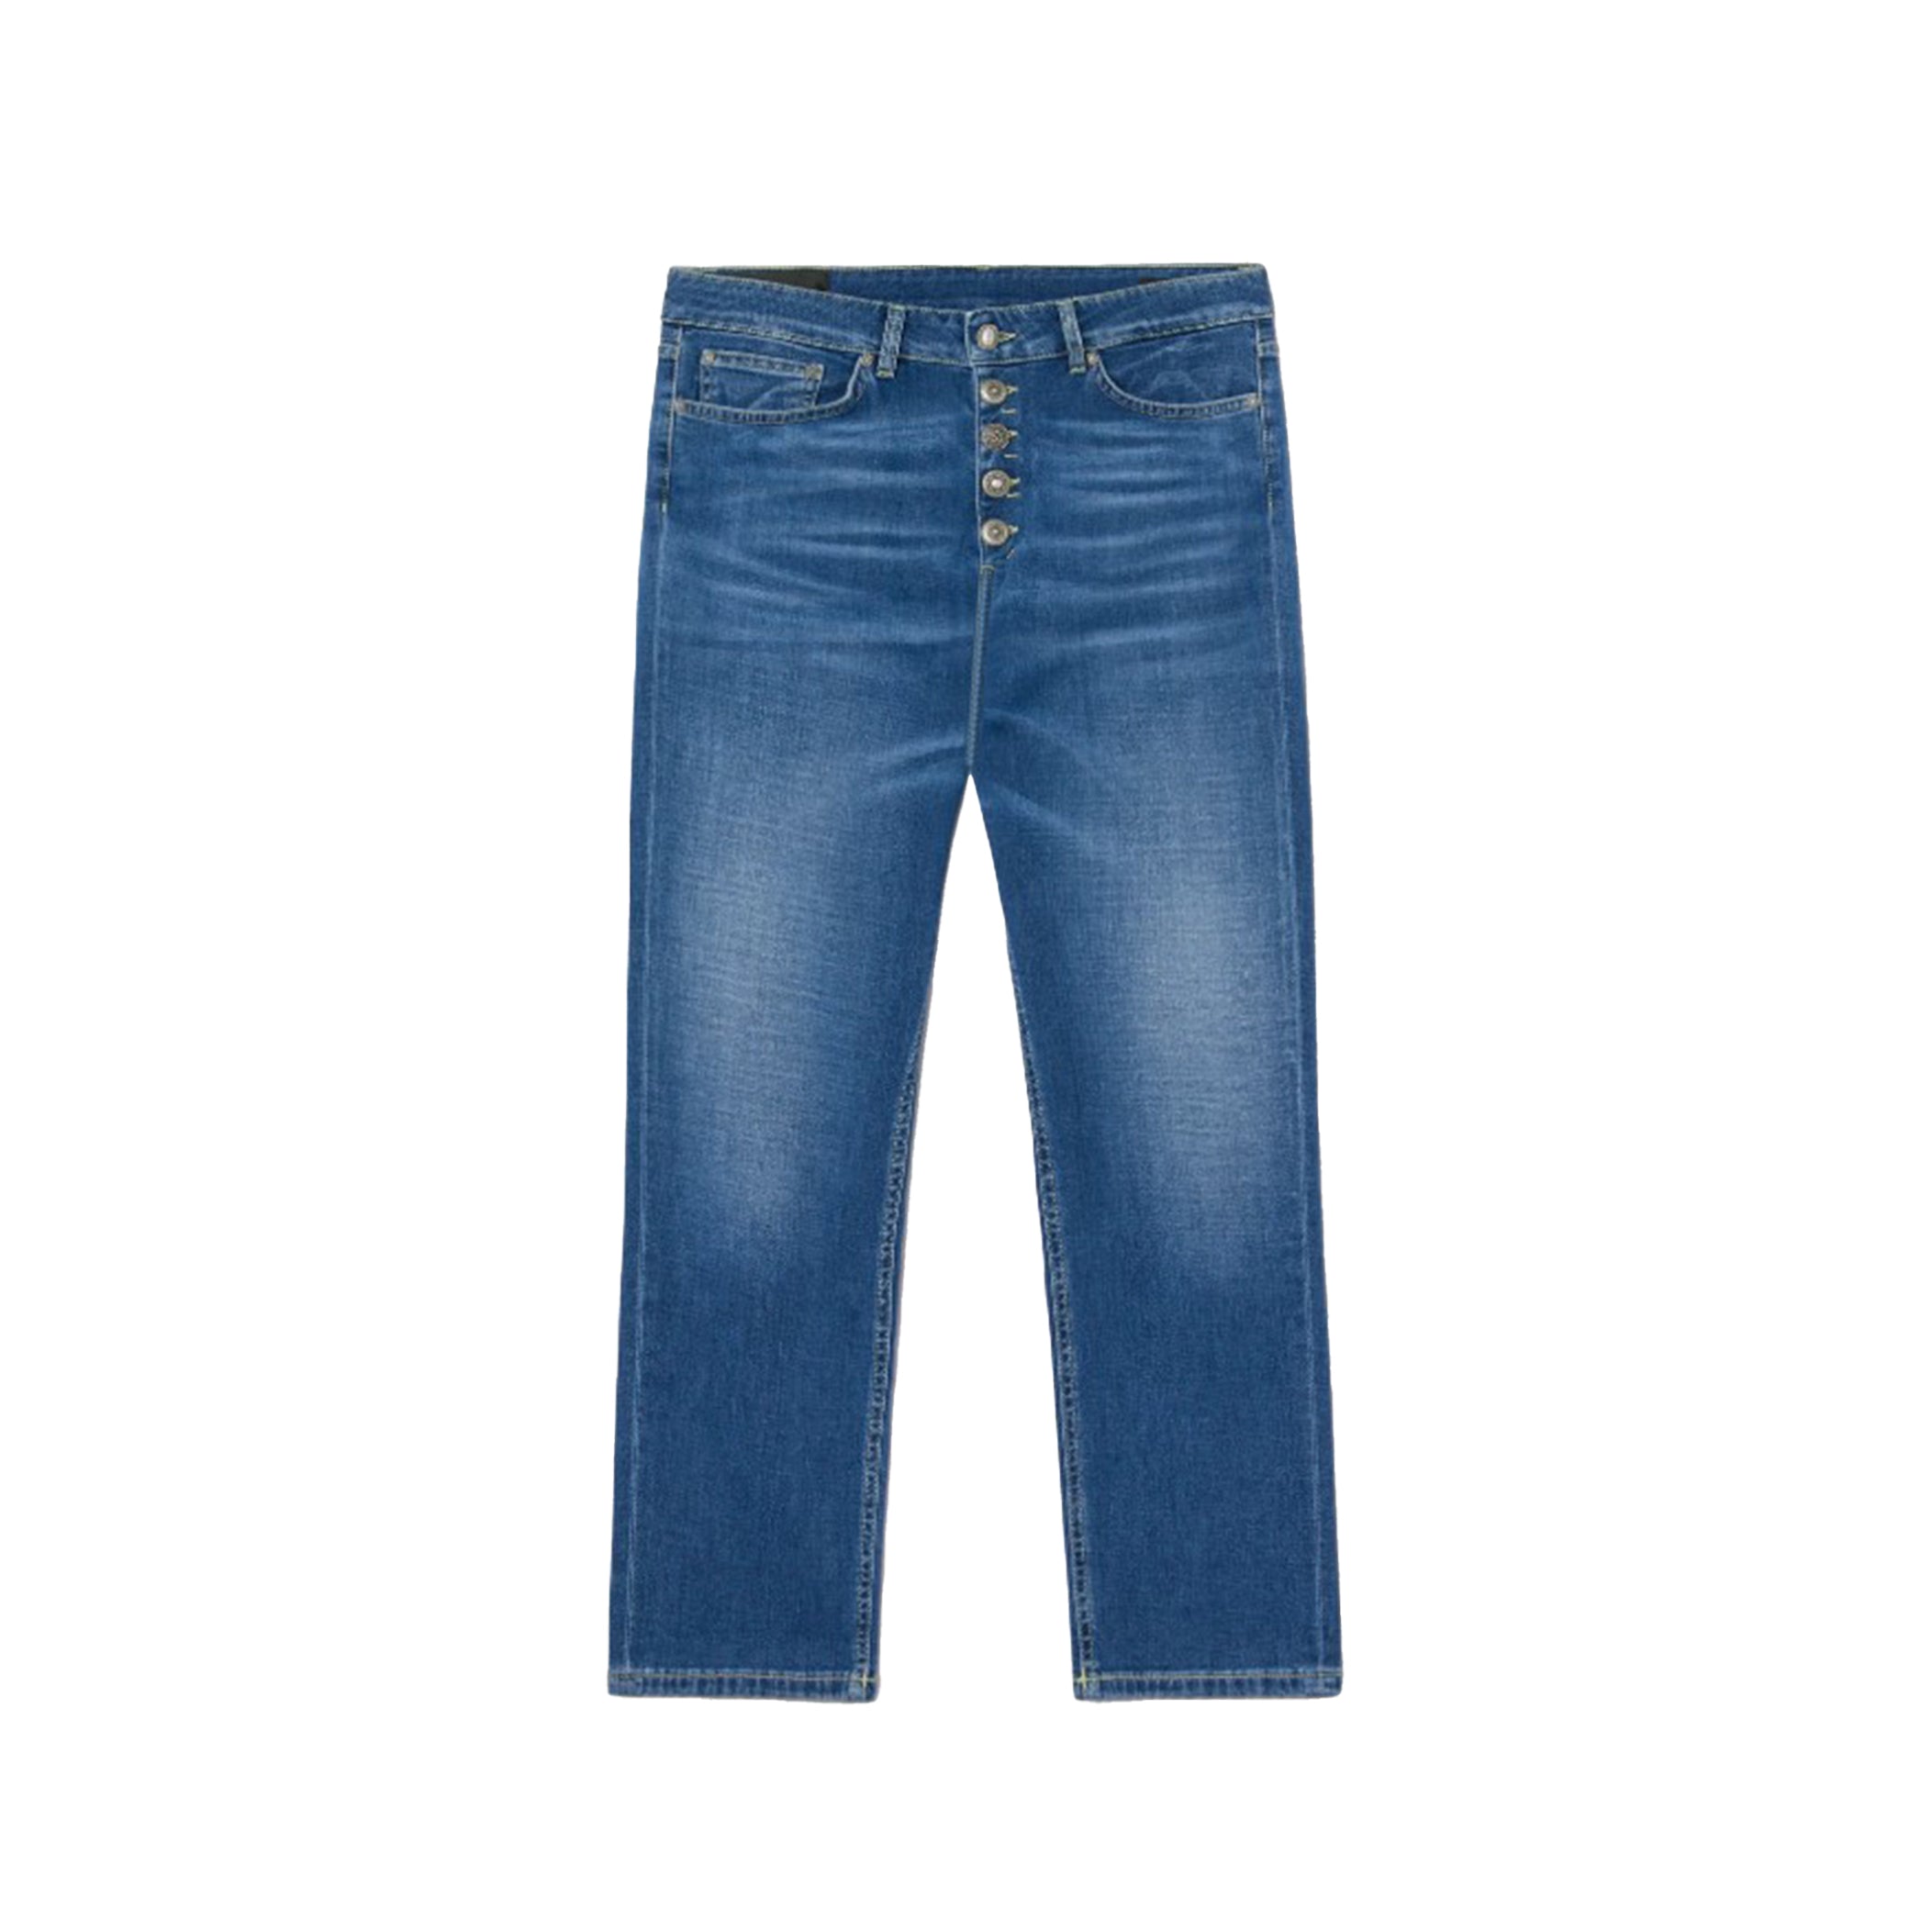 Jeans Koons Loose in denim stretch scuro